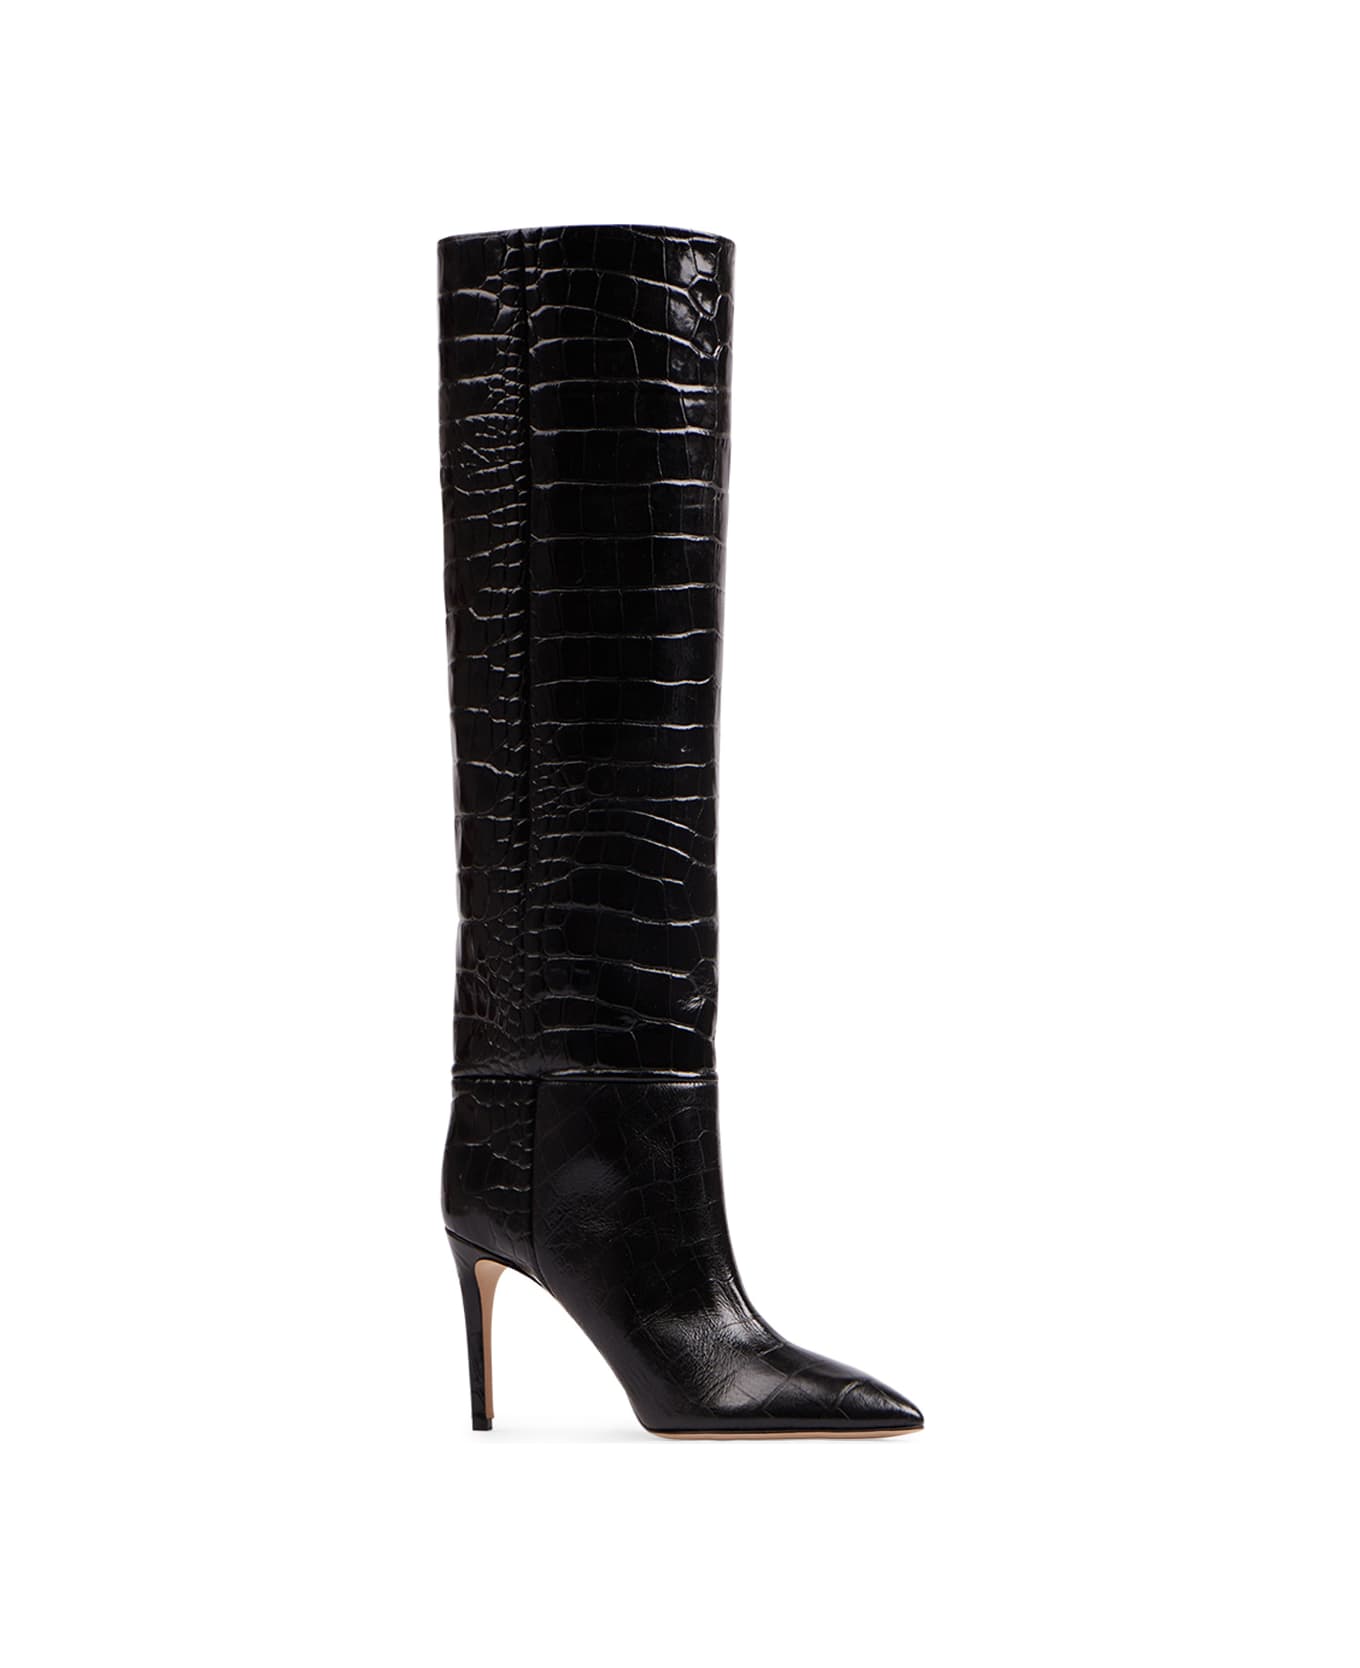 Paris Texas Charcoal Leather Stiletto Boots With Crocodile Print - Carbone ブーツ